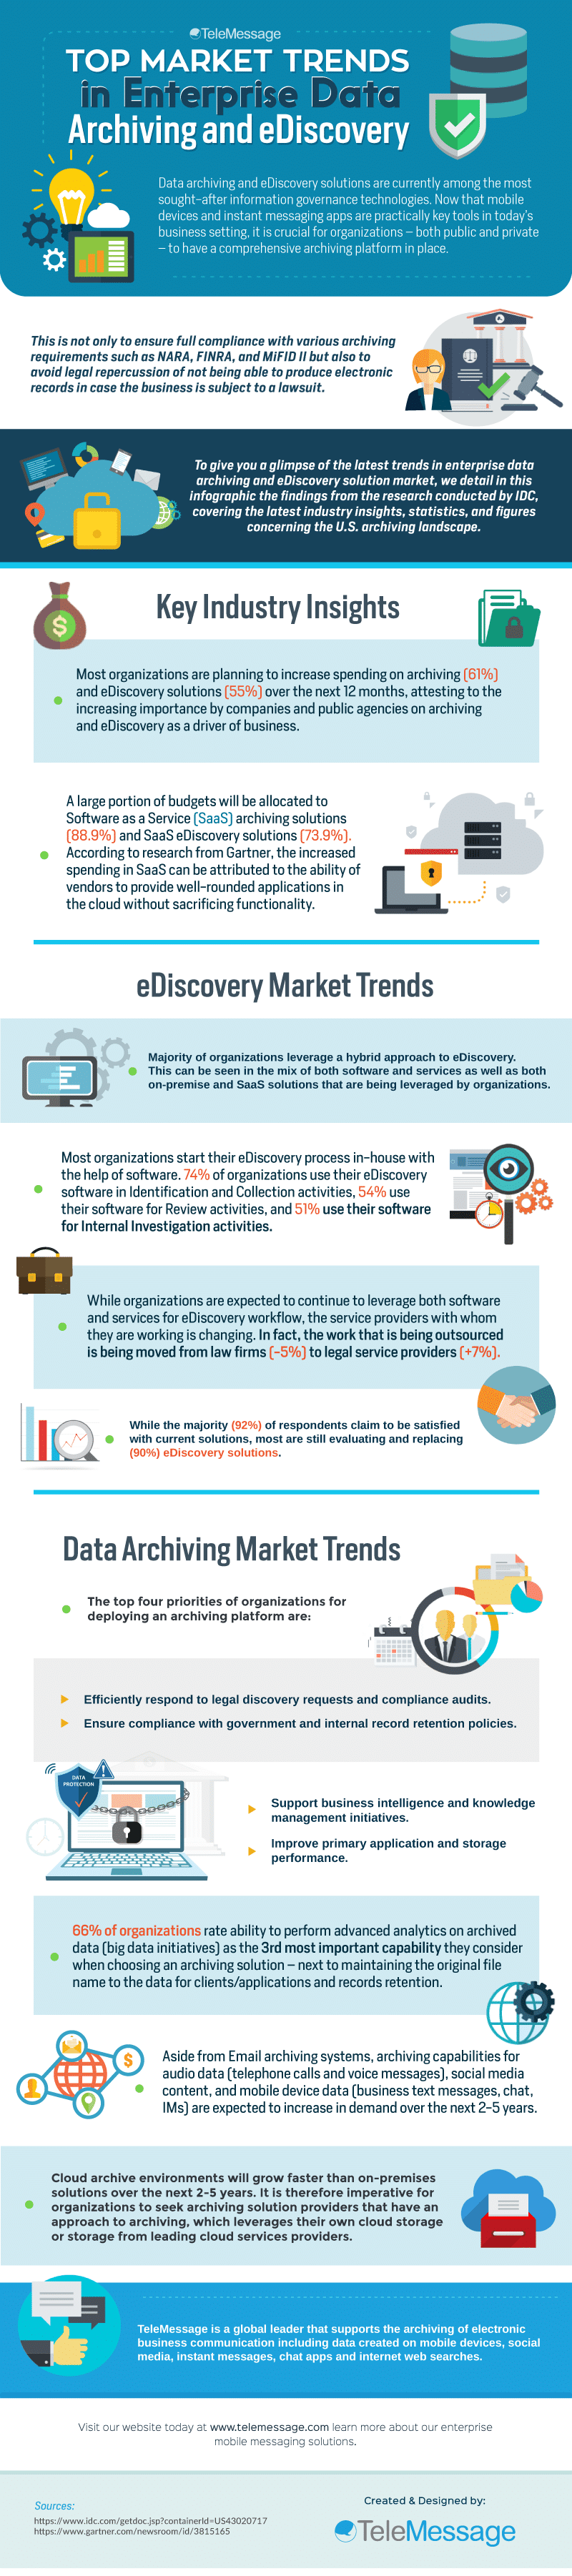 Top Market Trends in Enterprise Data Archiving and eDiscovery